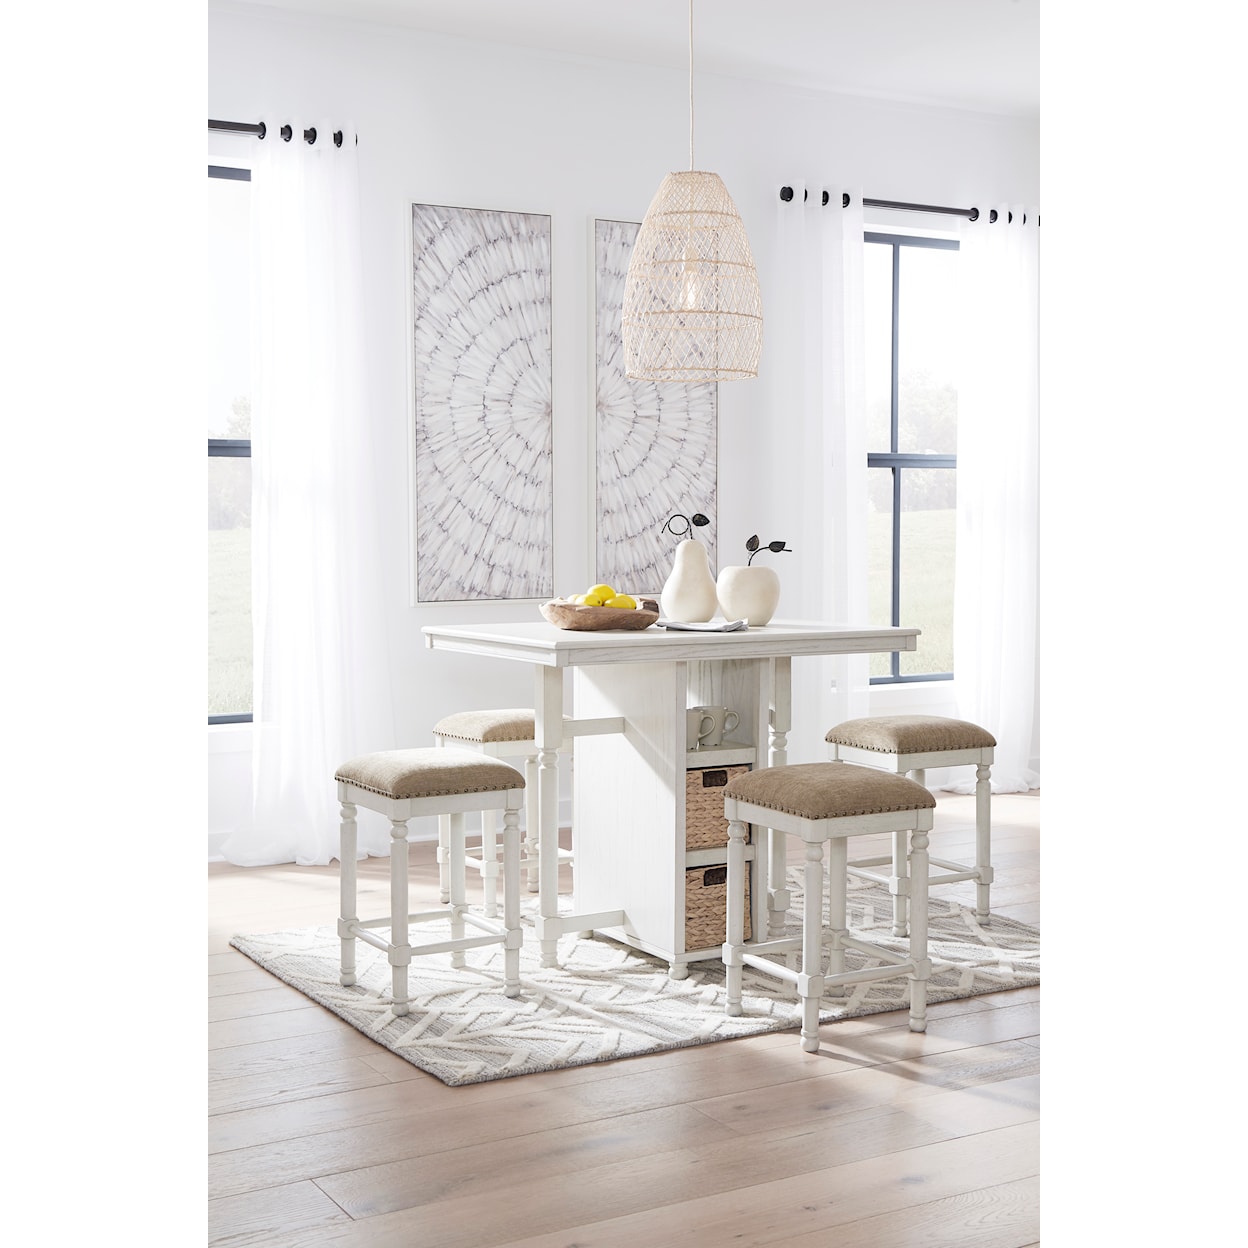 Signature Design by Ashley Robbinsdale Counter Table and Bar Stools (Set of 5)